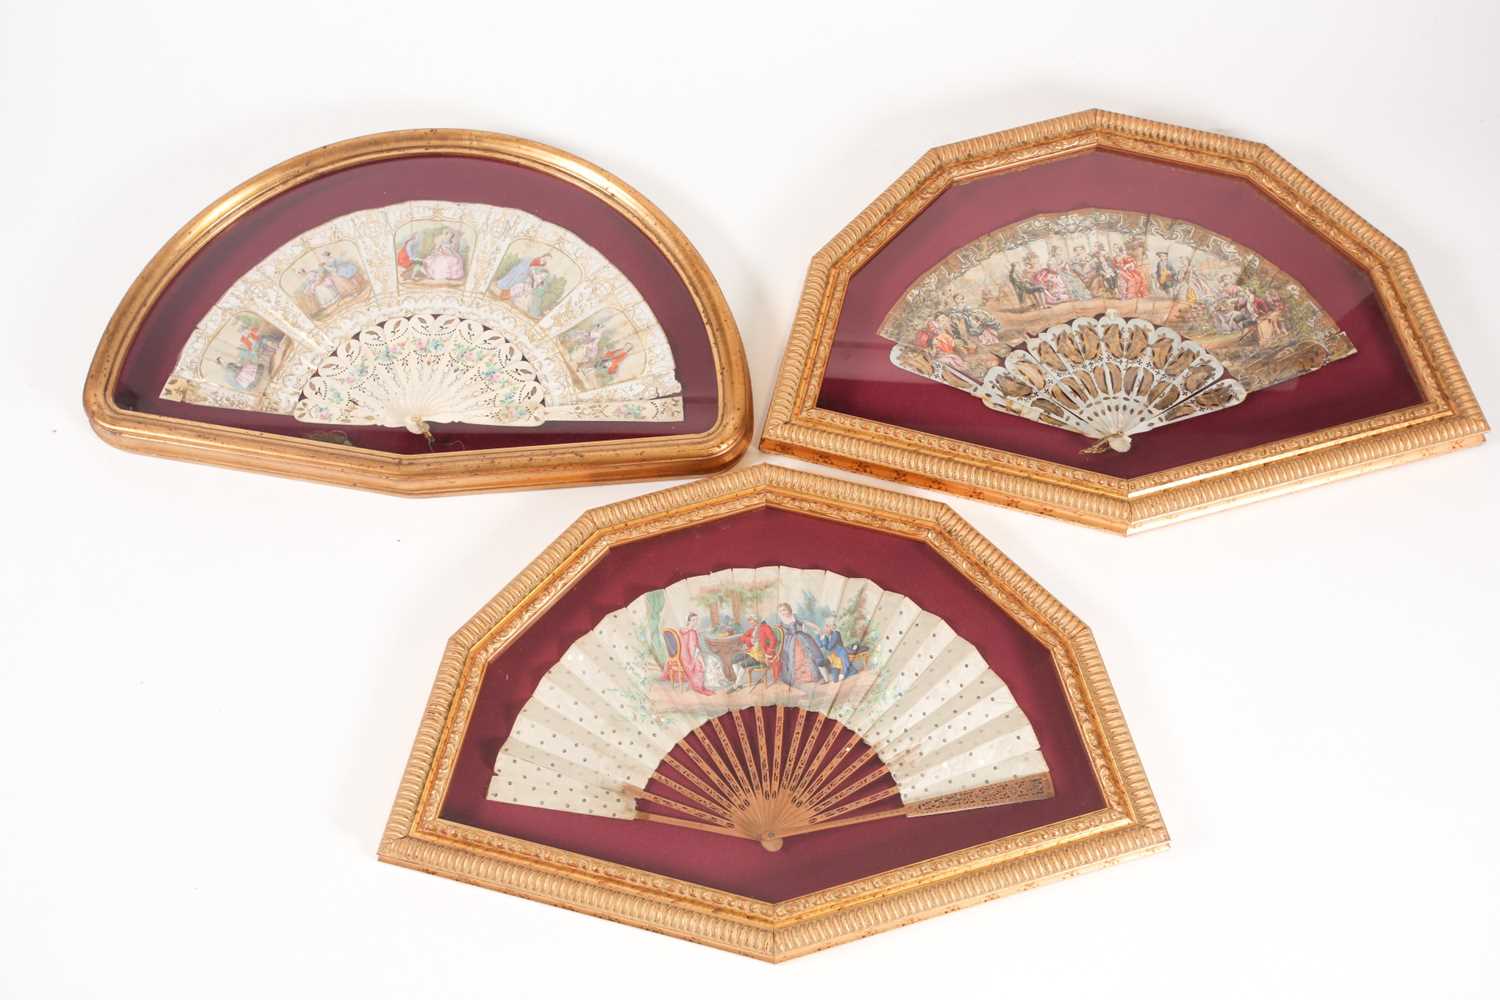 A late 18th century engraved, pierced, and gilt mother of pearl fan, the printed paper leaf with